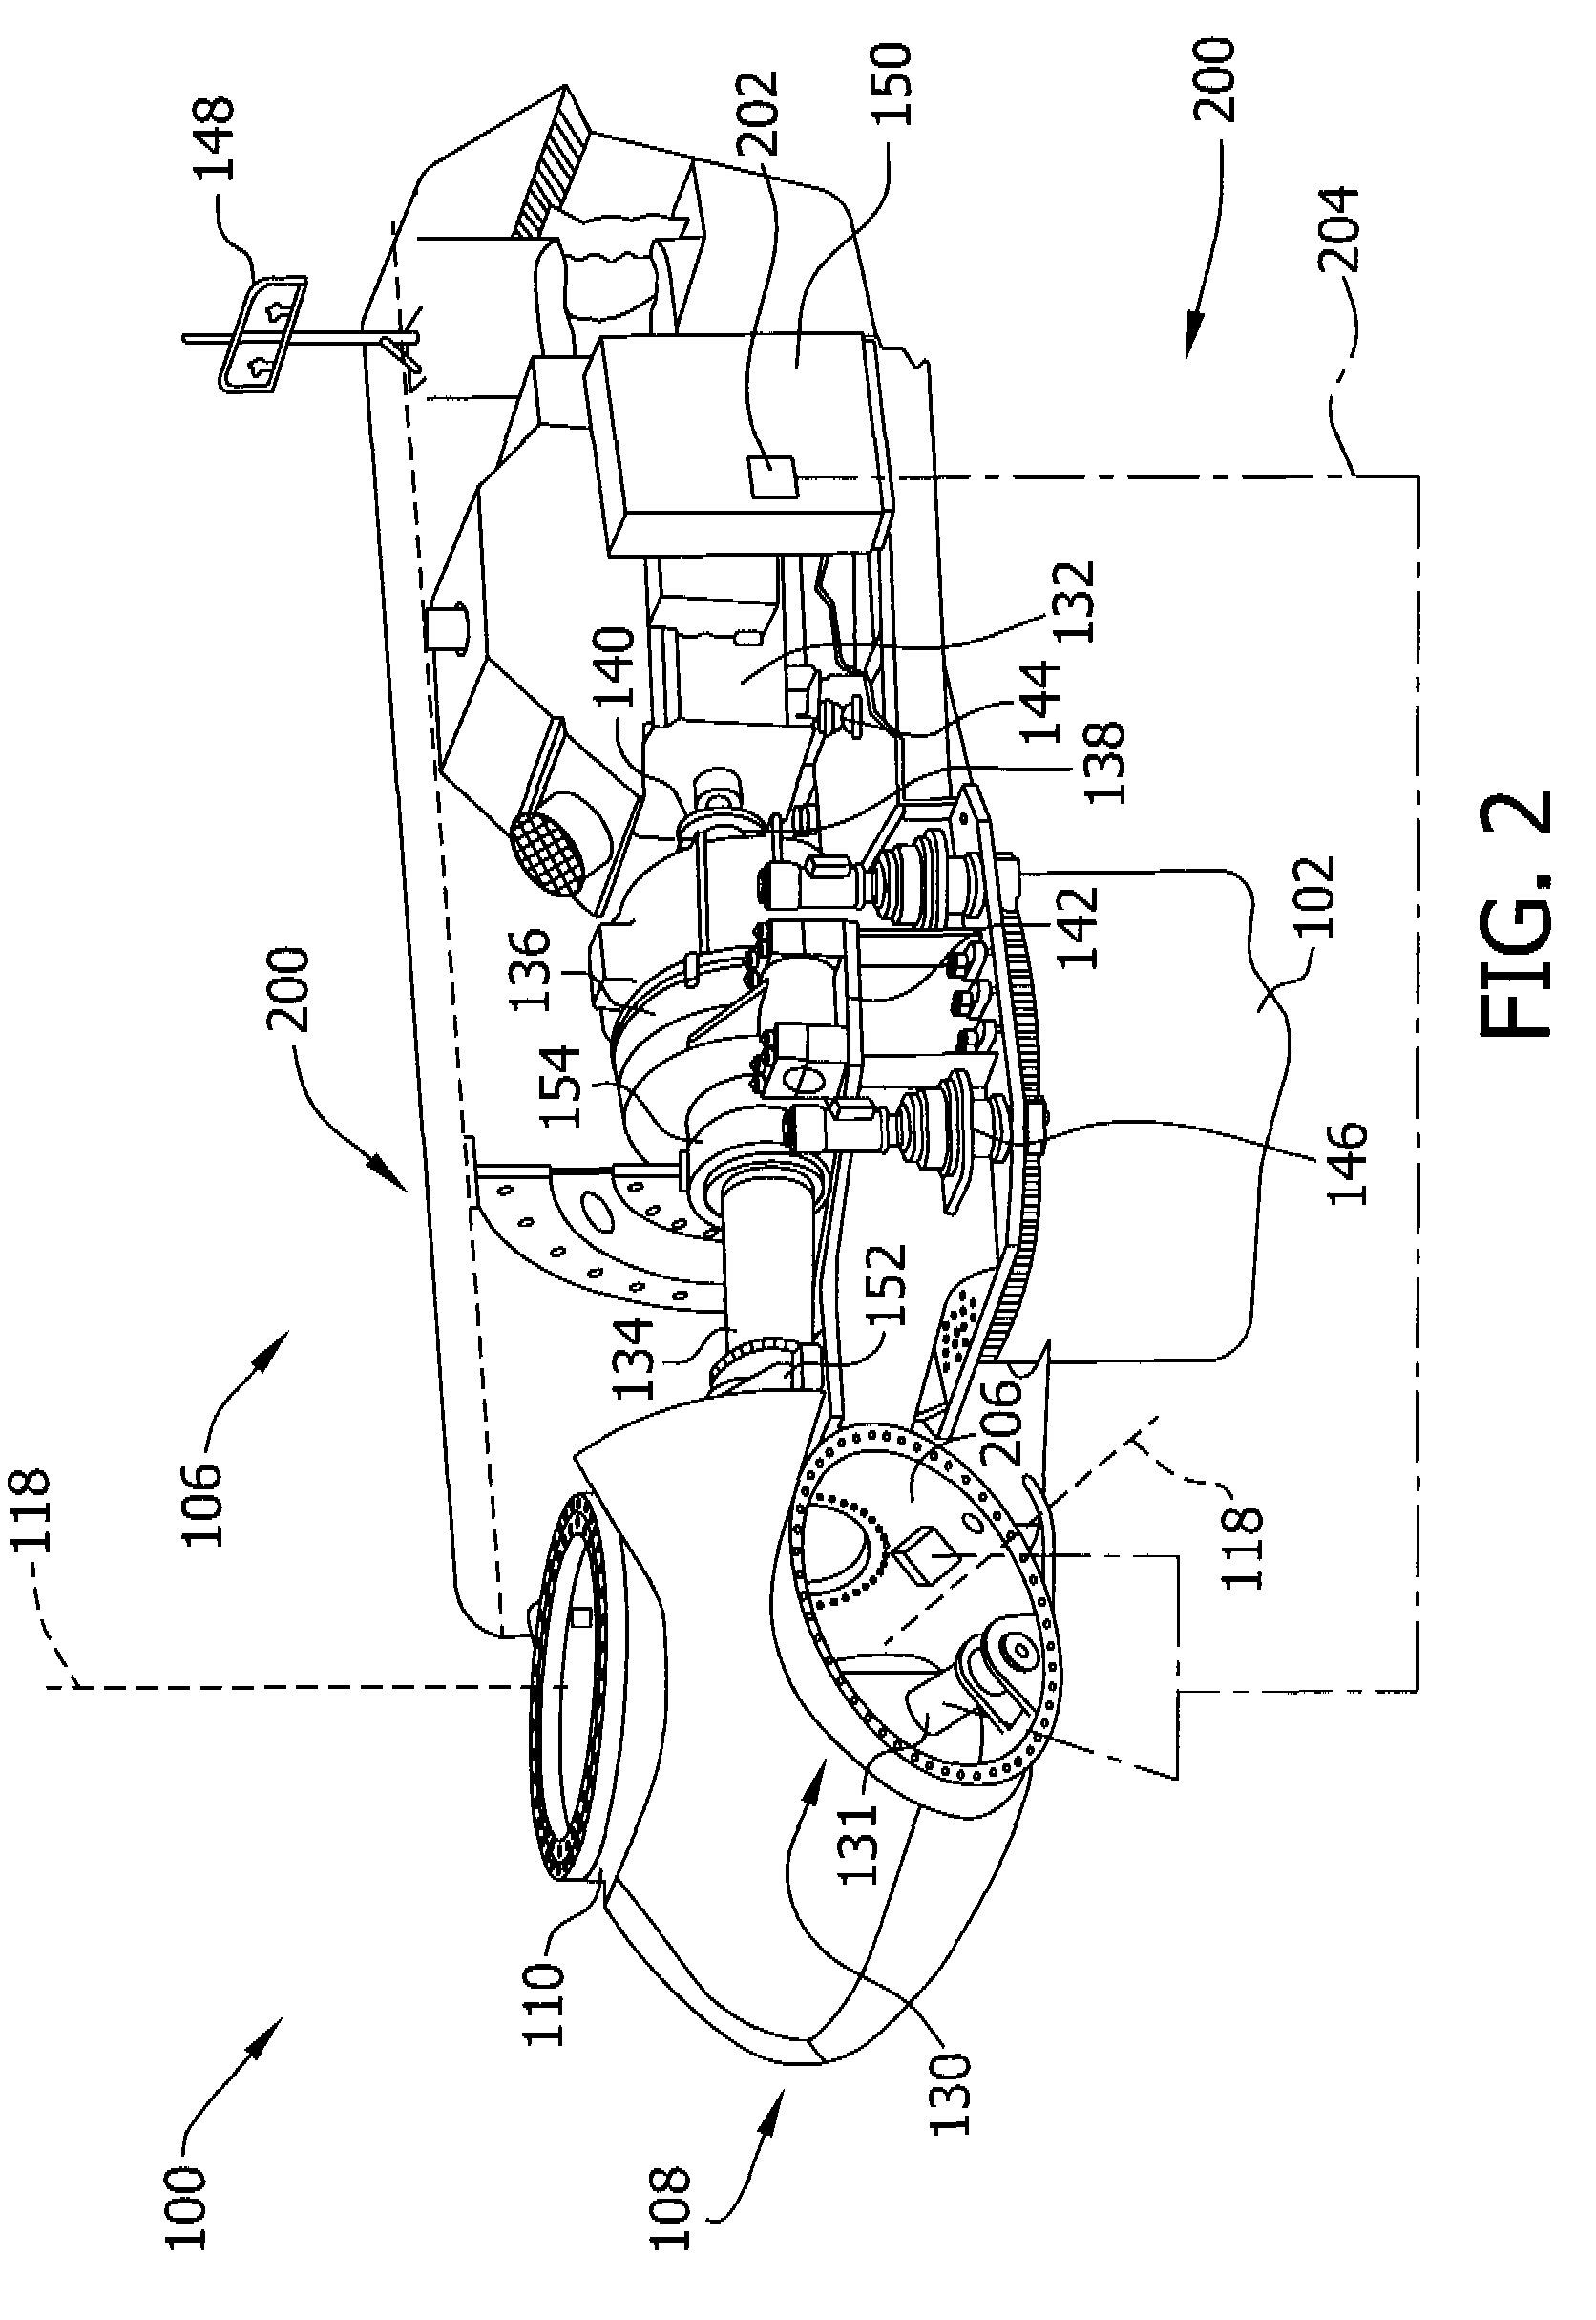 Method and system for operating a wind turbine generator